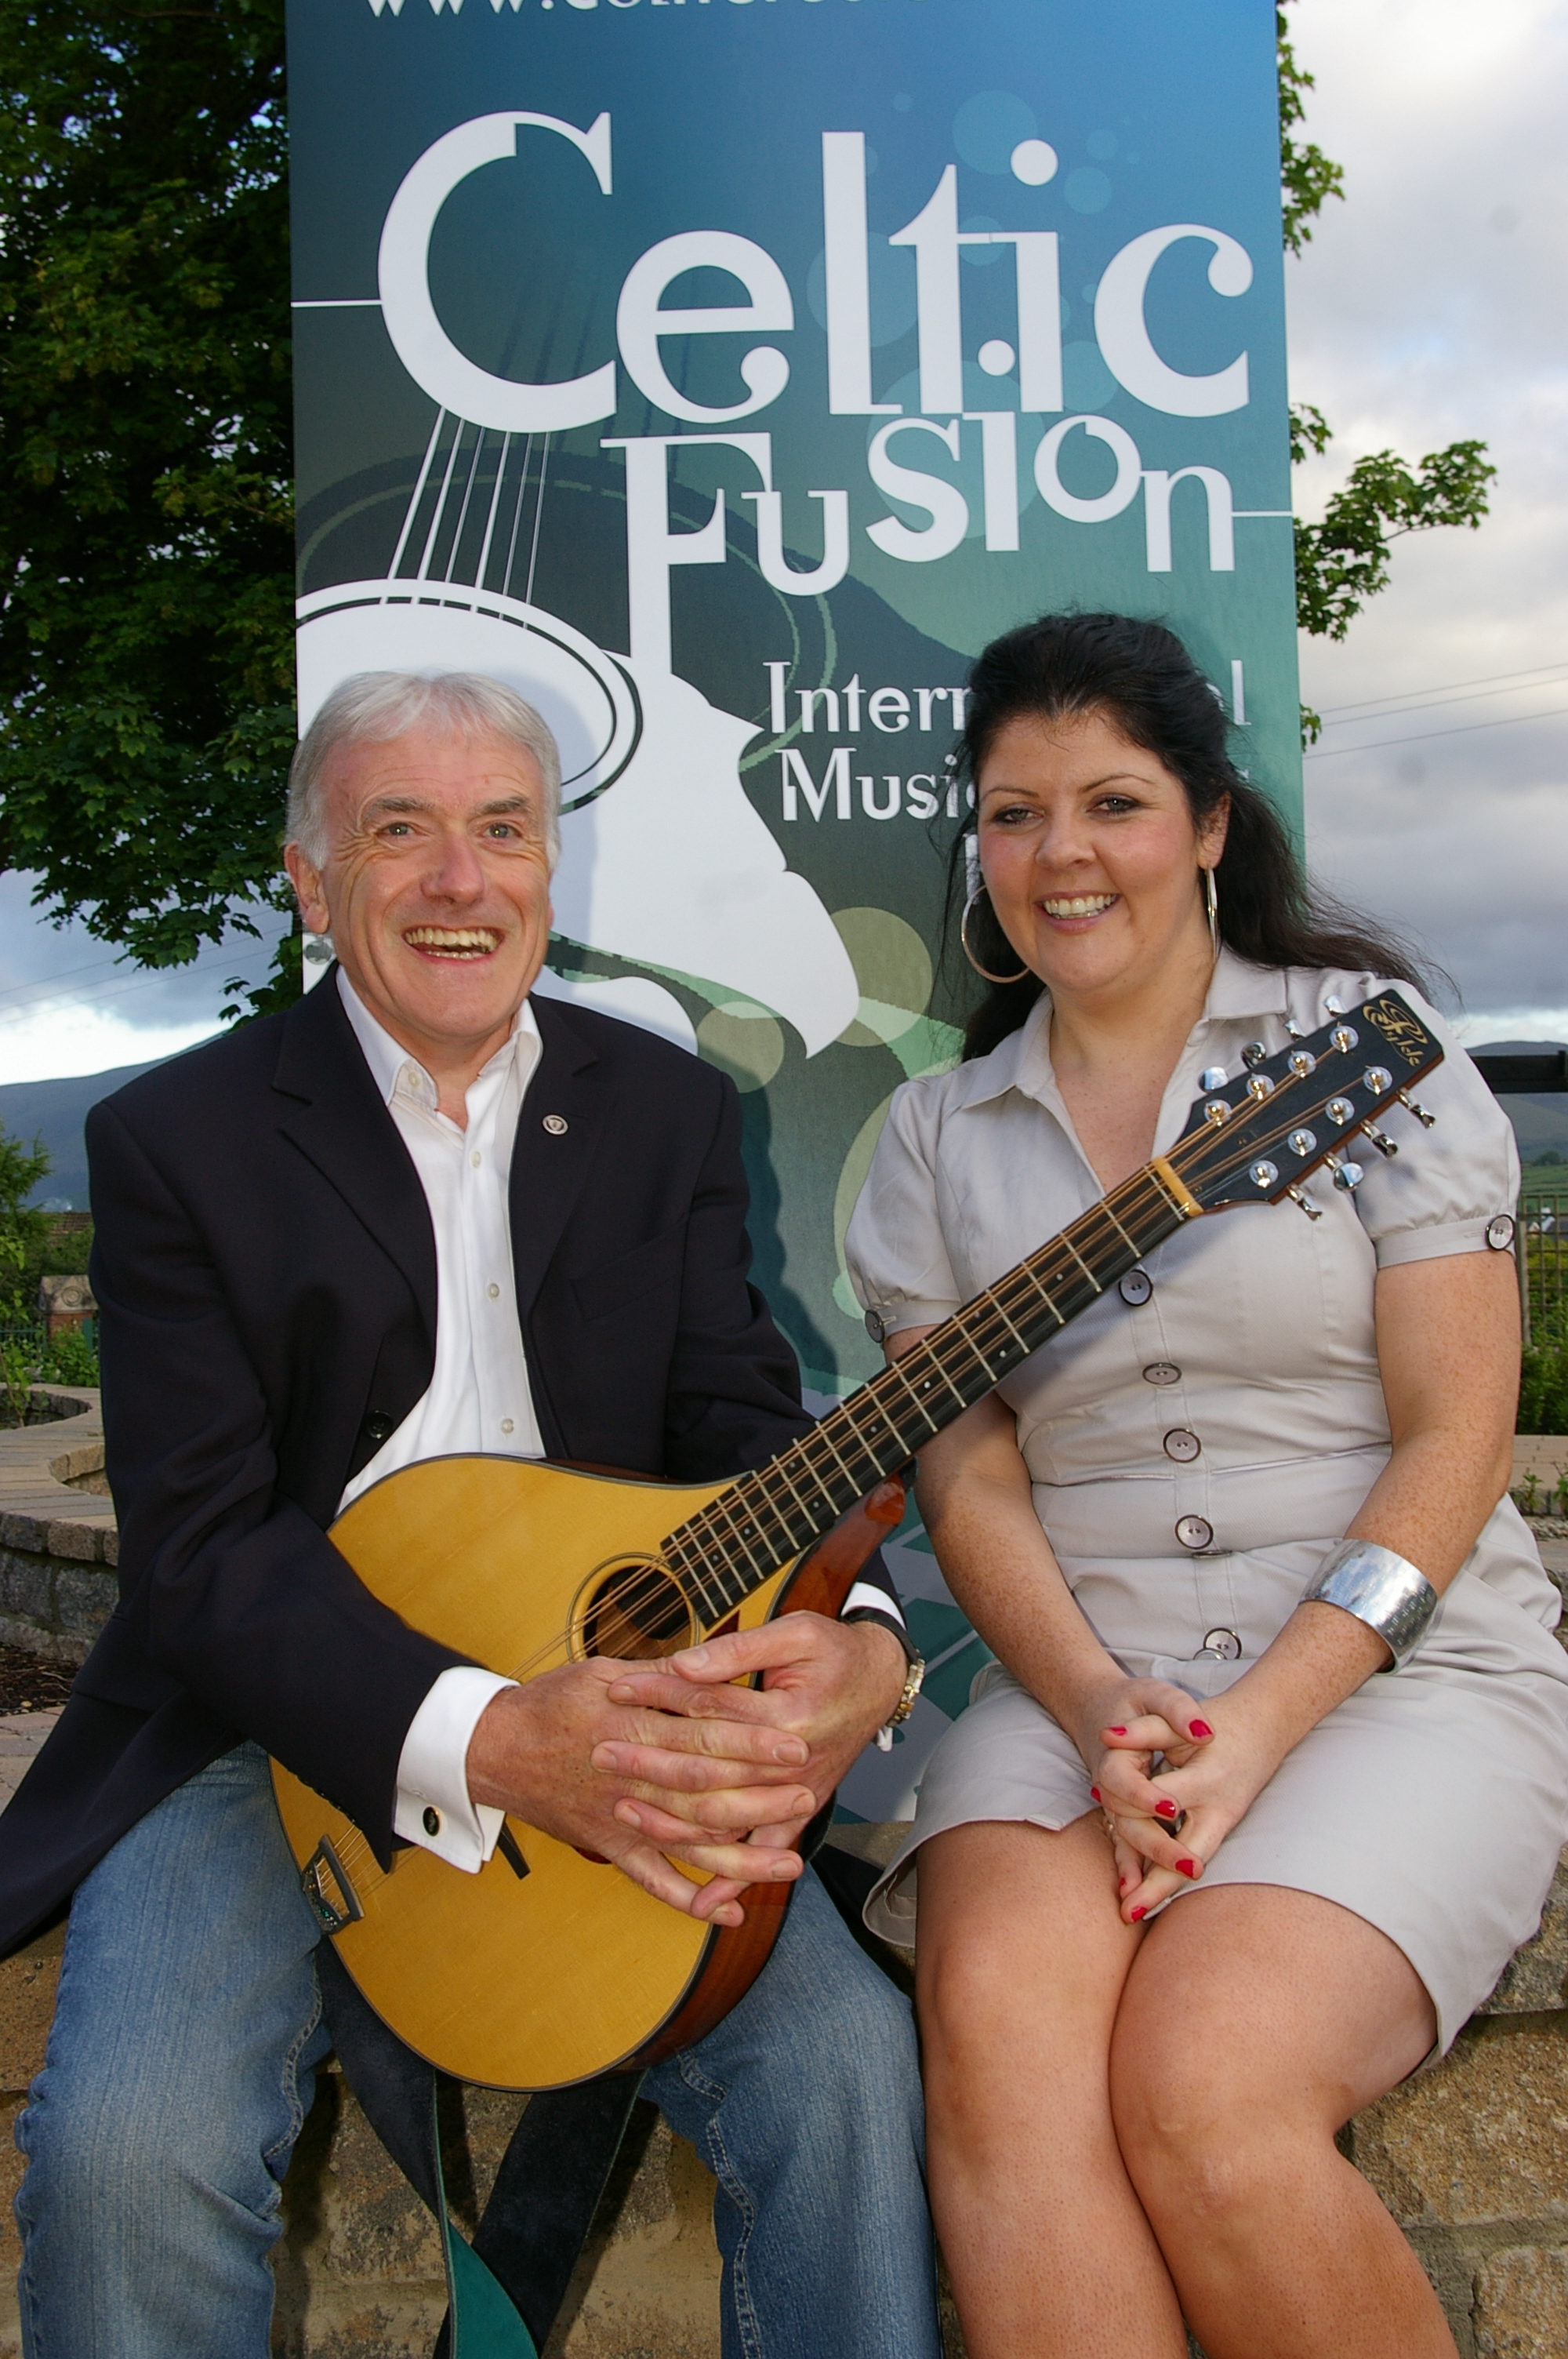 BBC radio presenter Lynette Fay and singer/songwriter Seán Donnelly at the launch of Celtic Fusion